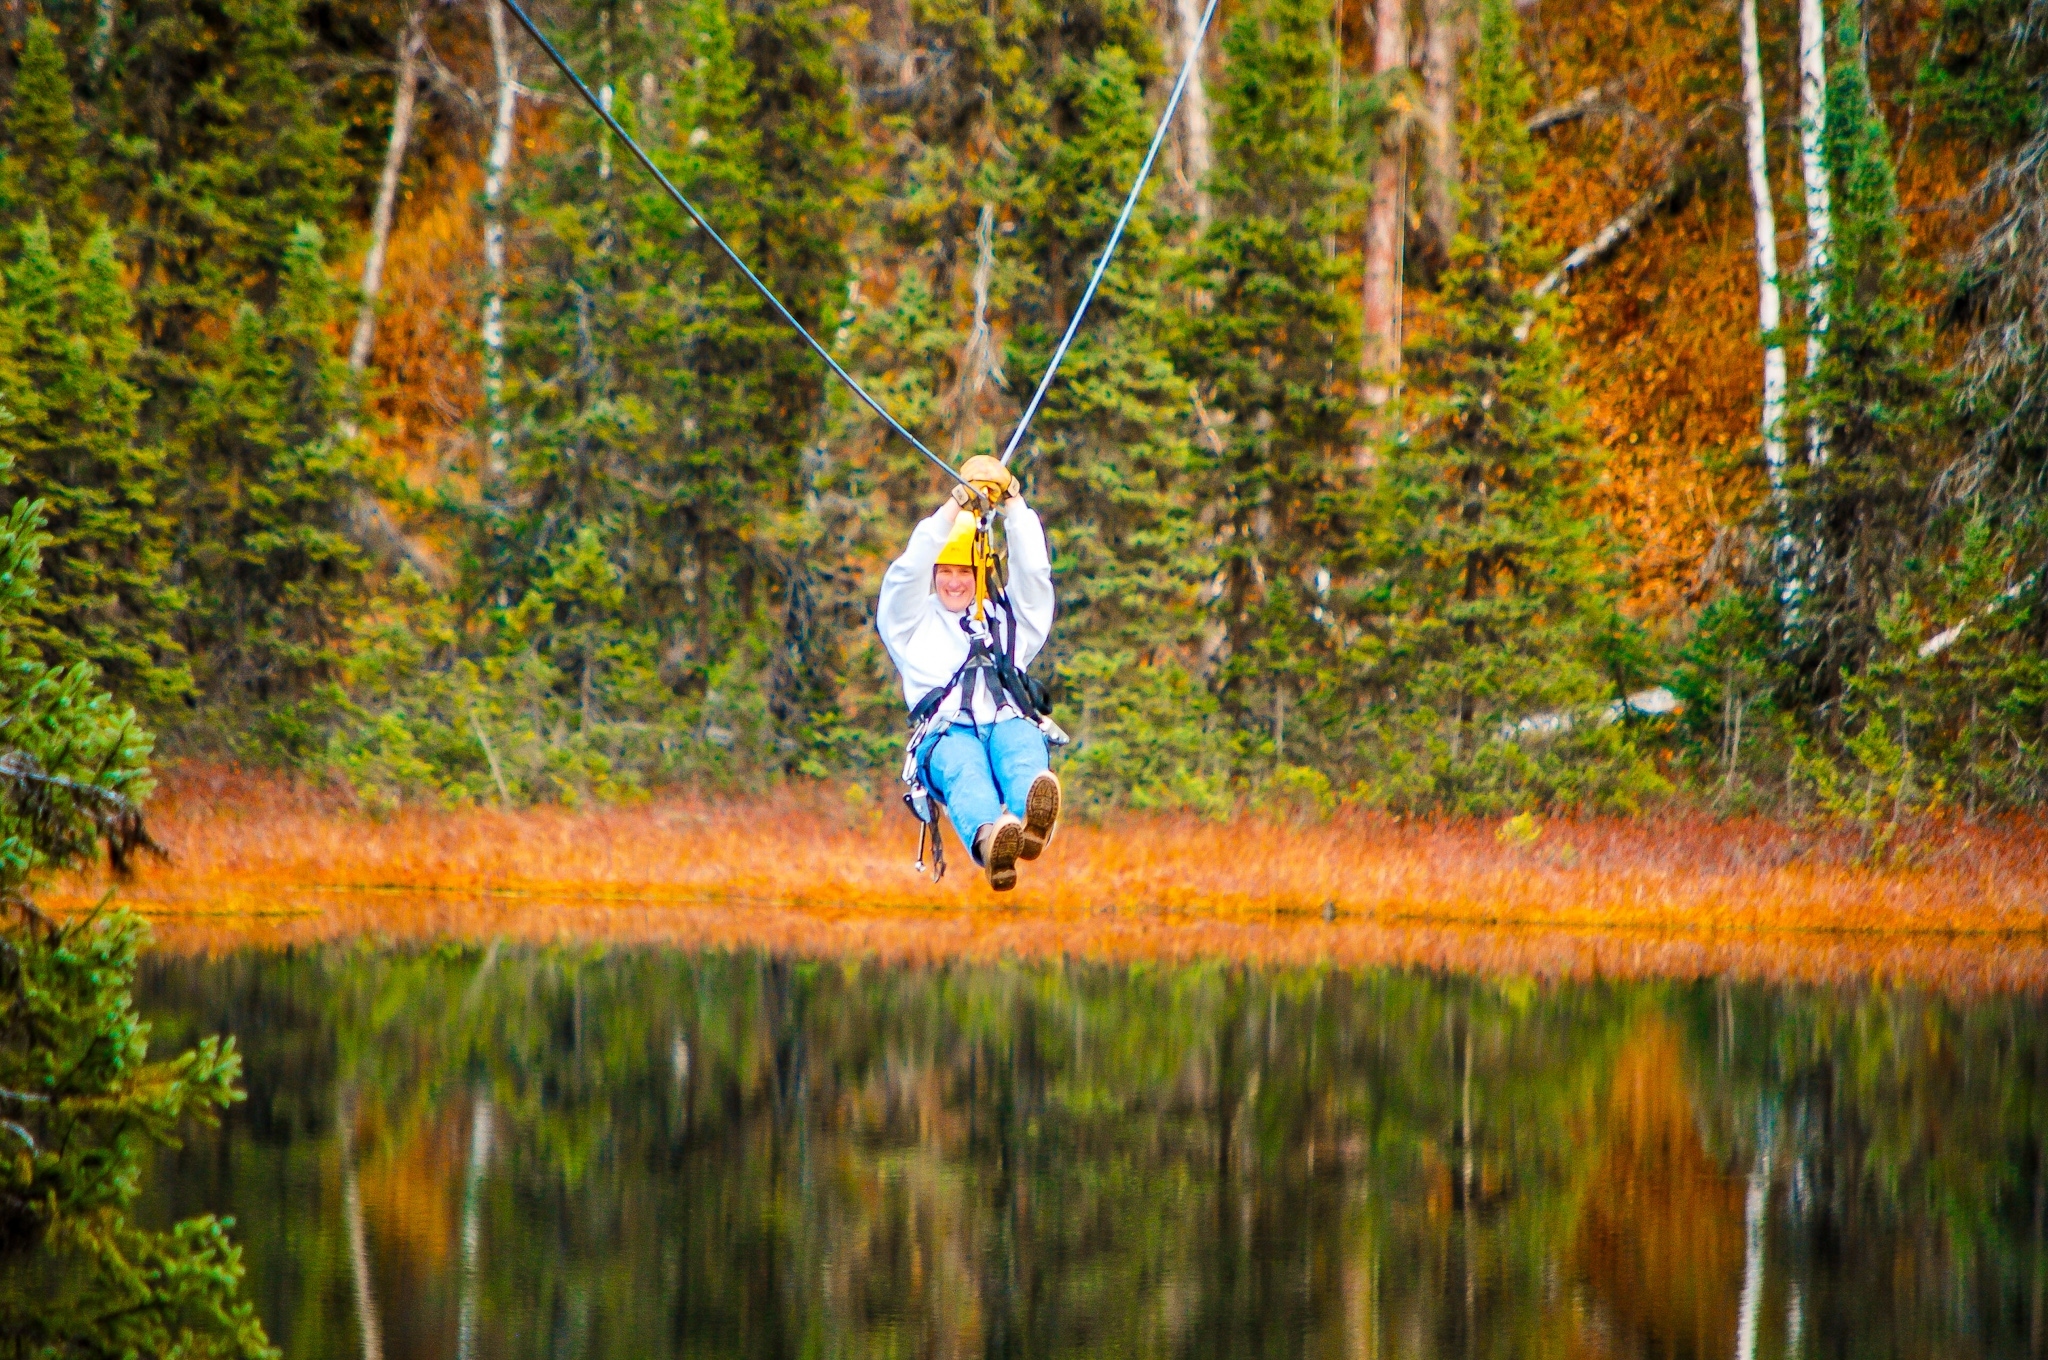 A woman rushes through the air over a lake on a zipline in an Alaska autumn forest setting